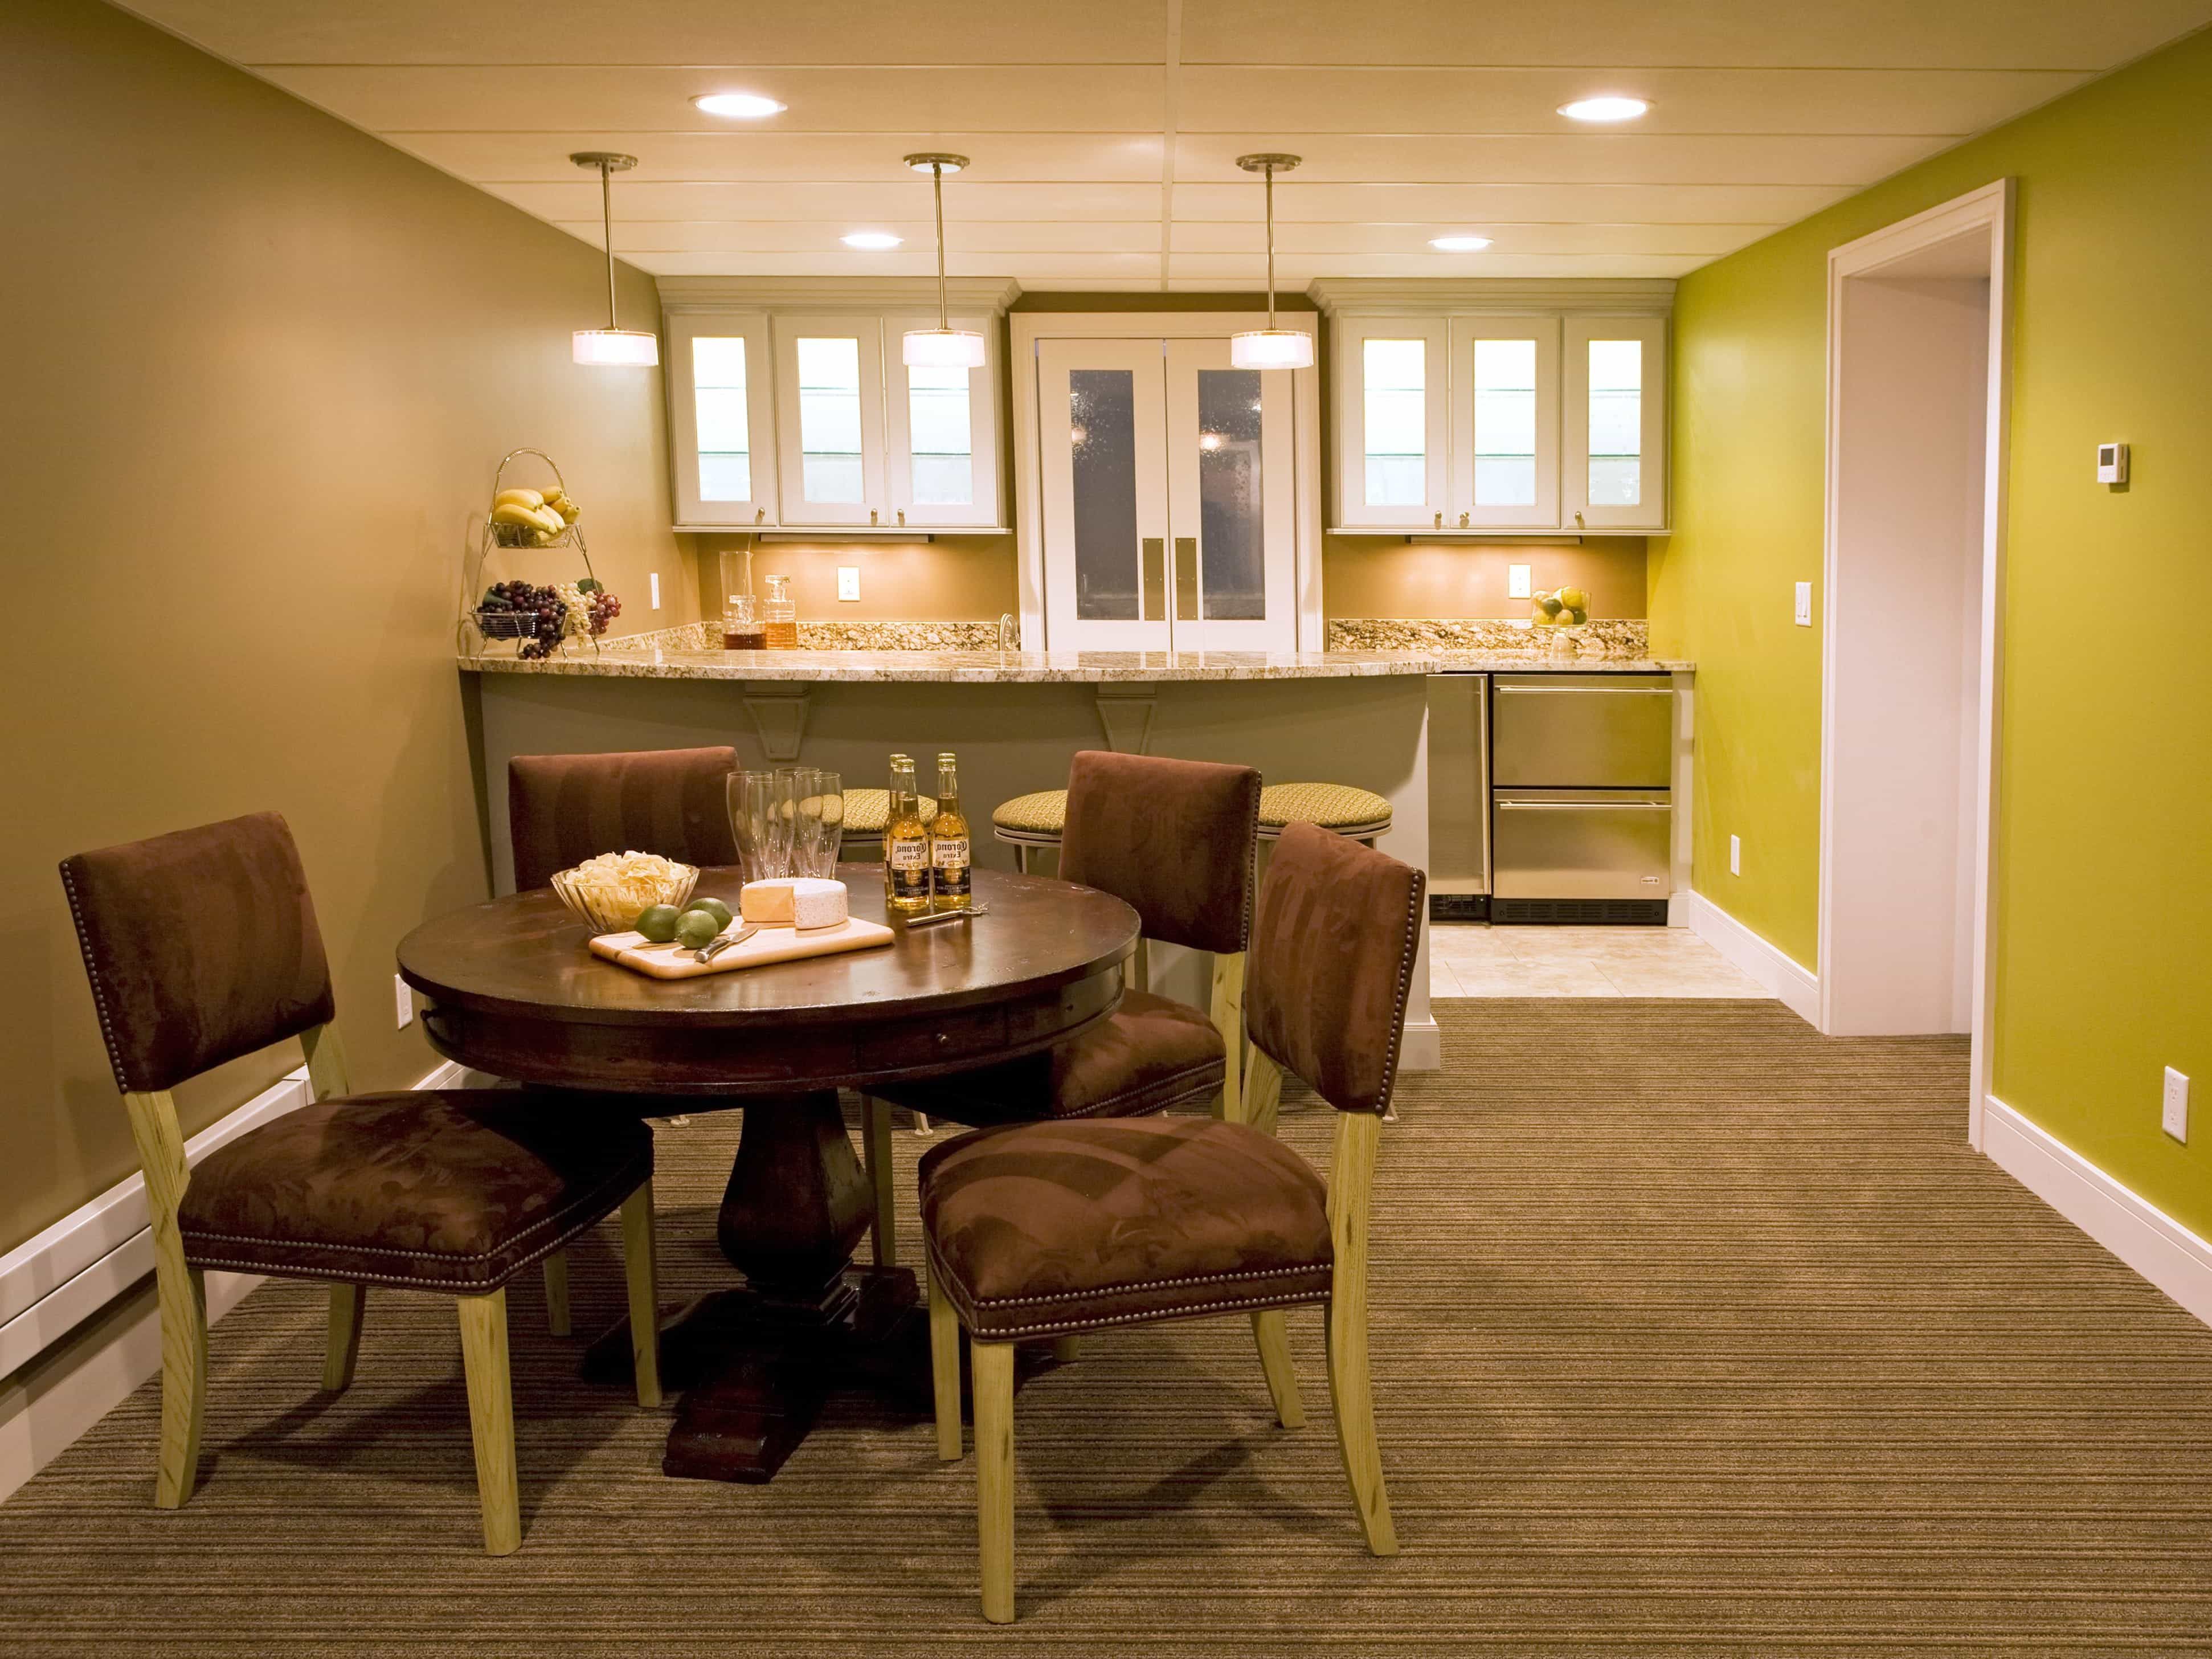 Basement Dining Room With Round Table Furniture (View 24 of 25)